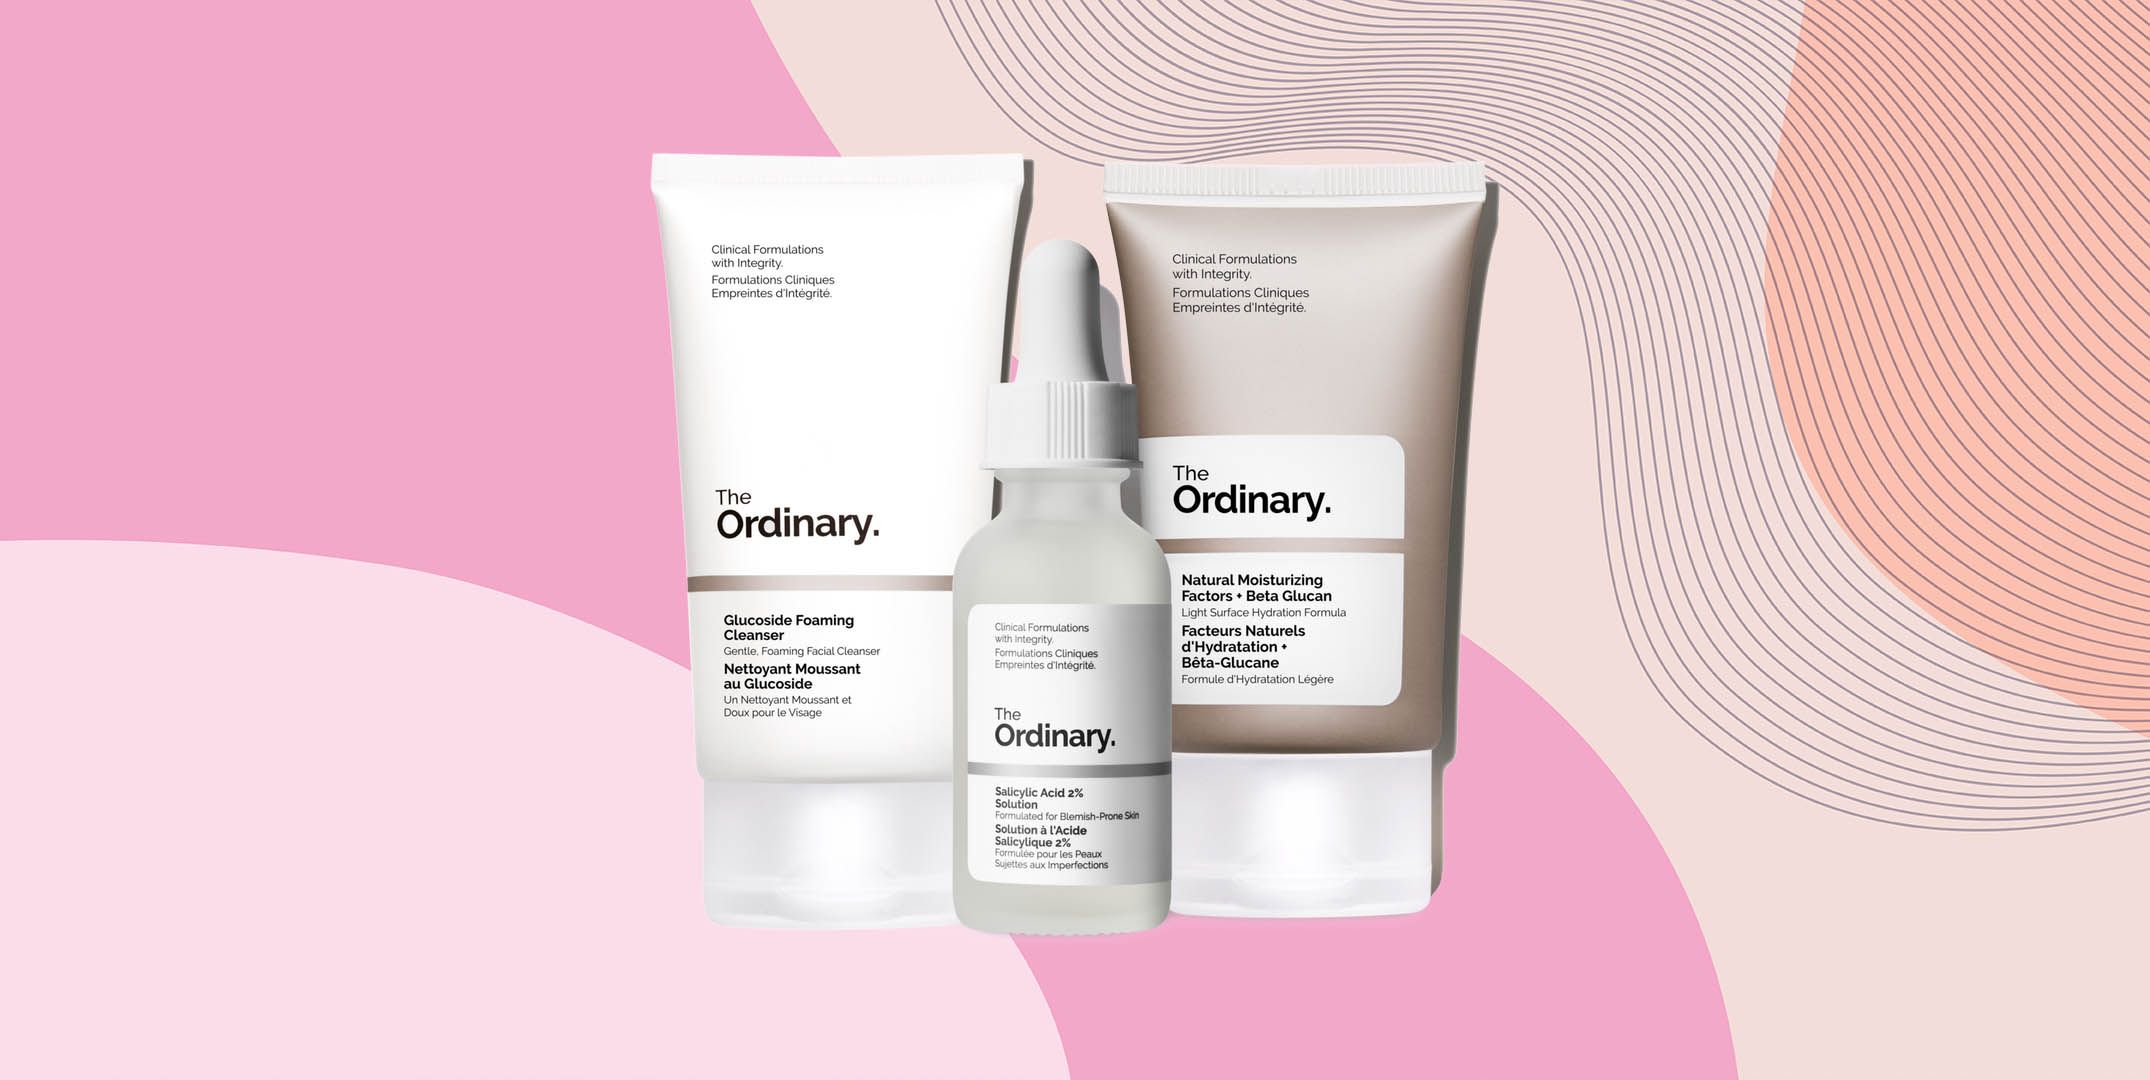 What To Buy From The Ordinary Best Routine For Every Skin Type pic